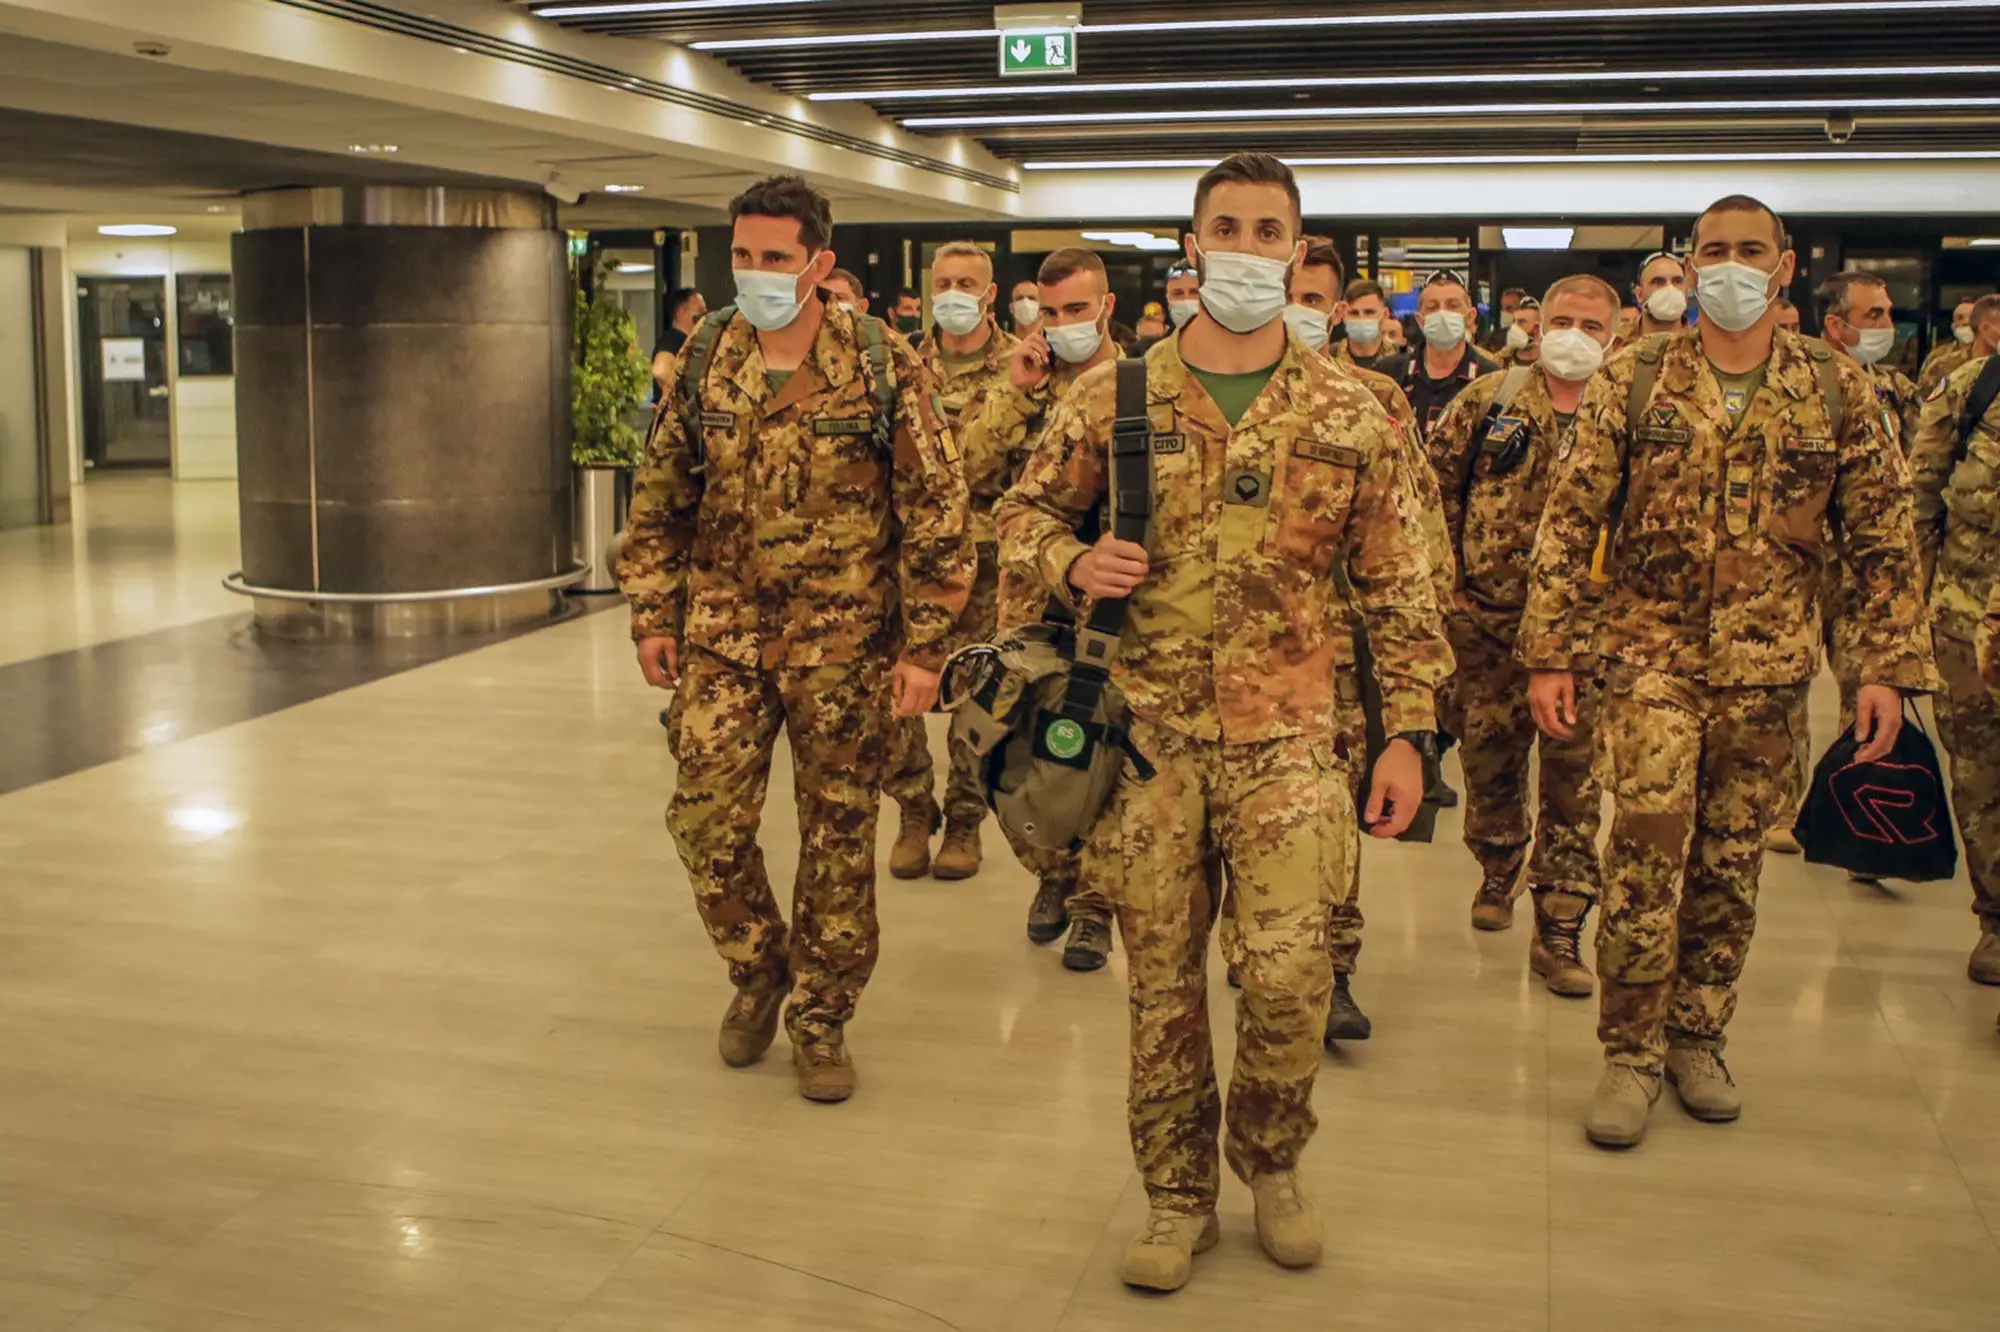 The last Italian troops withdrawing from Afghanistan walk through the airport.